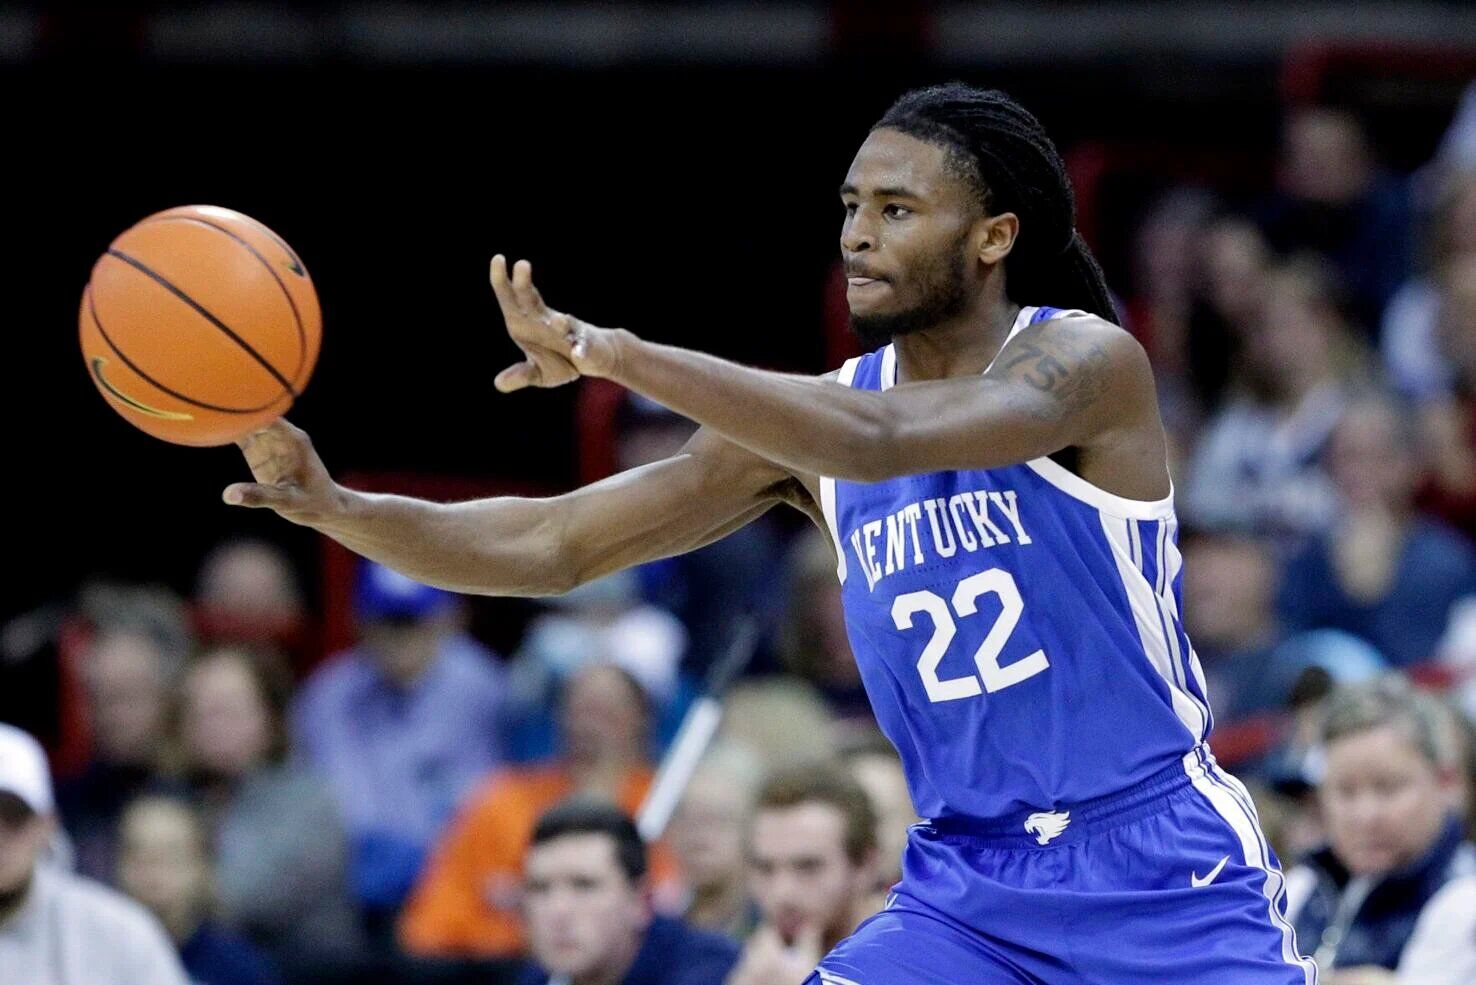 UKs Wallace 10th pick in NBA Draft, traded from Dallas to Oklahoma City Sports somerset-kentucky pic